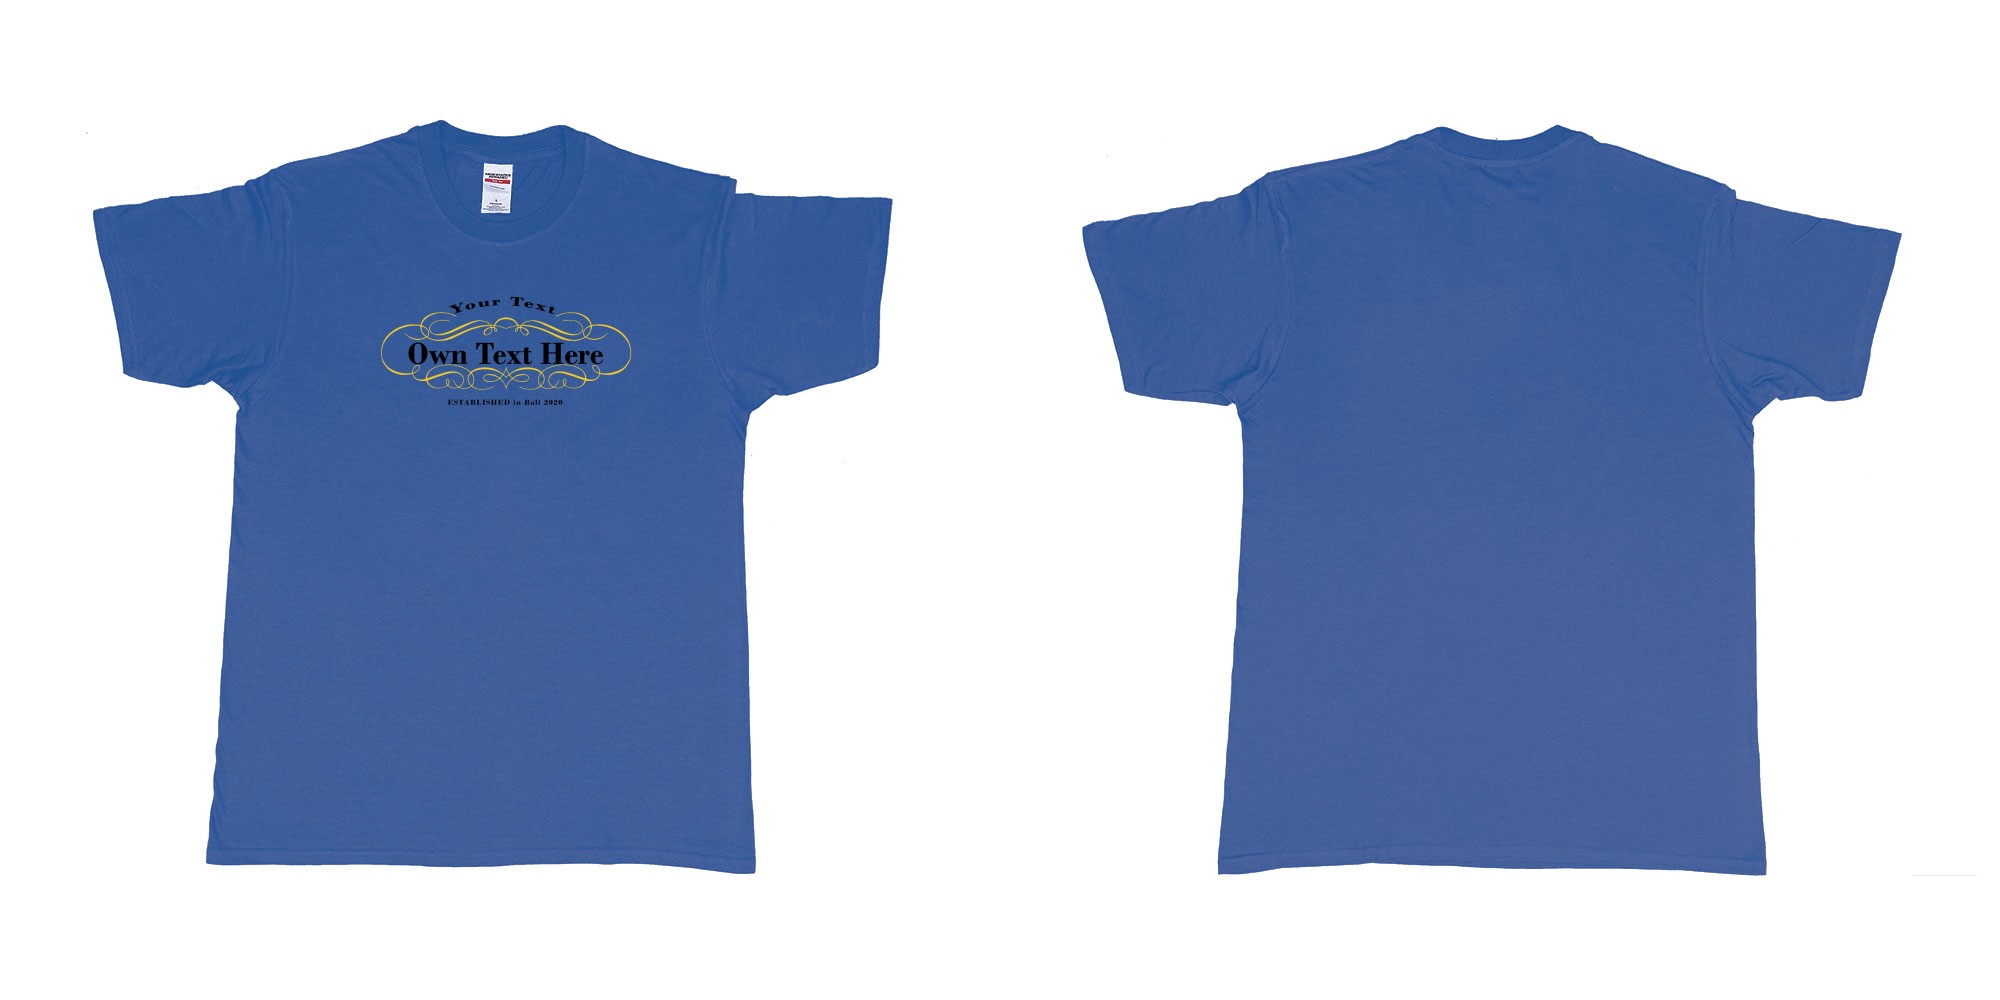 Custom tshirt design Laurent perrier in fabric color royal-blue choice your own text made in Bali by The Pirate Way